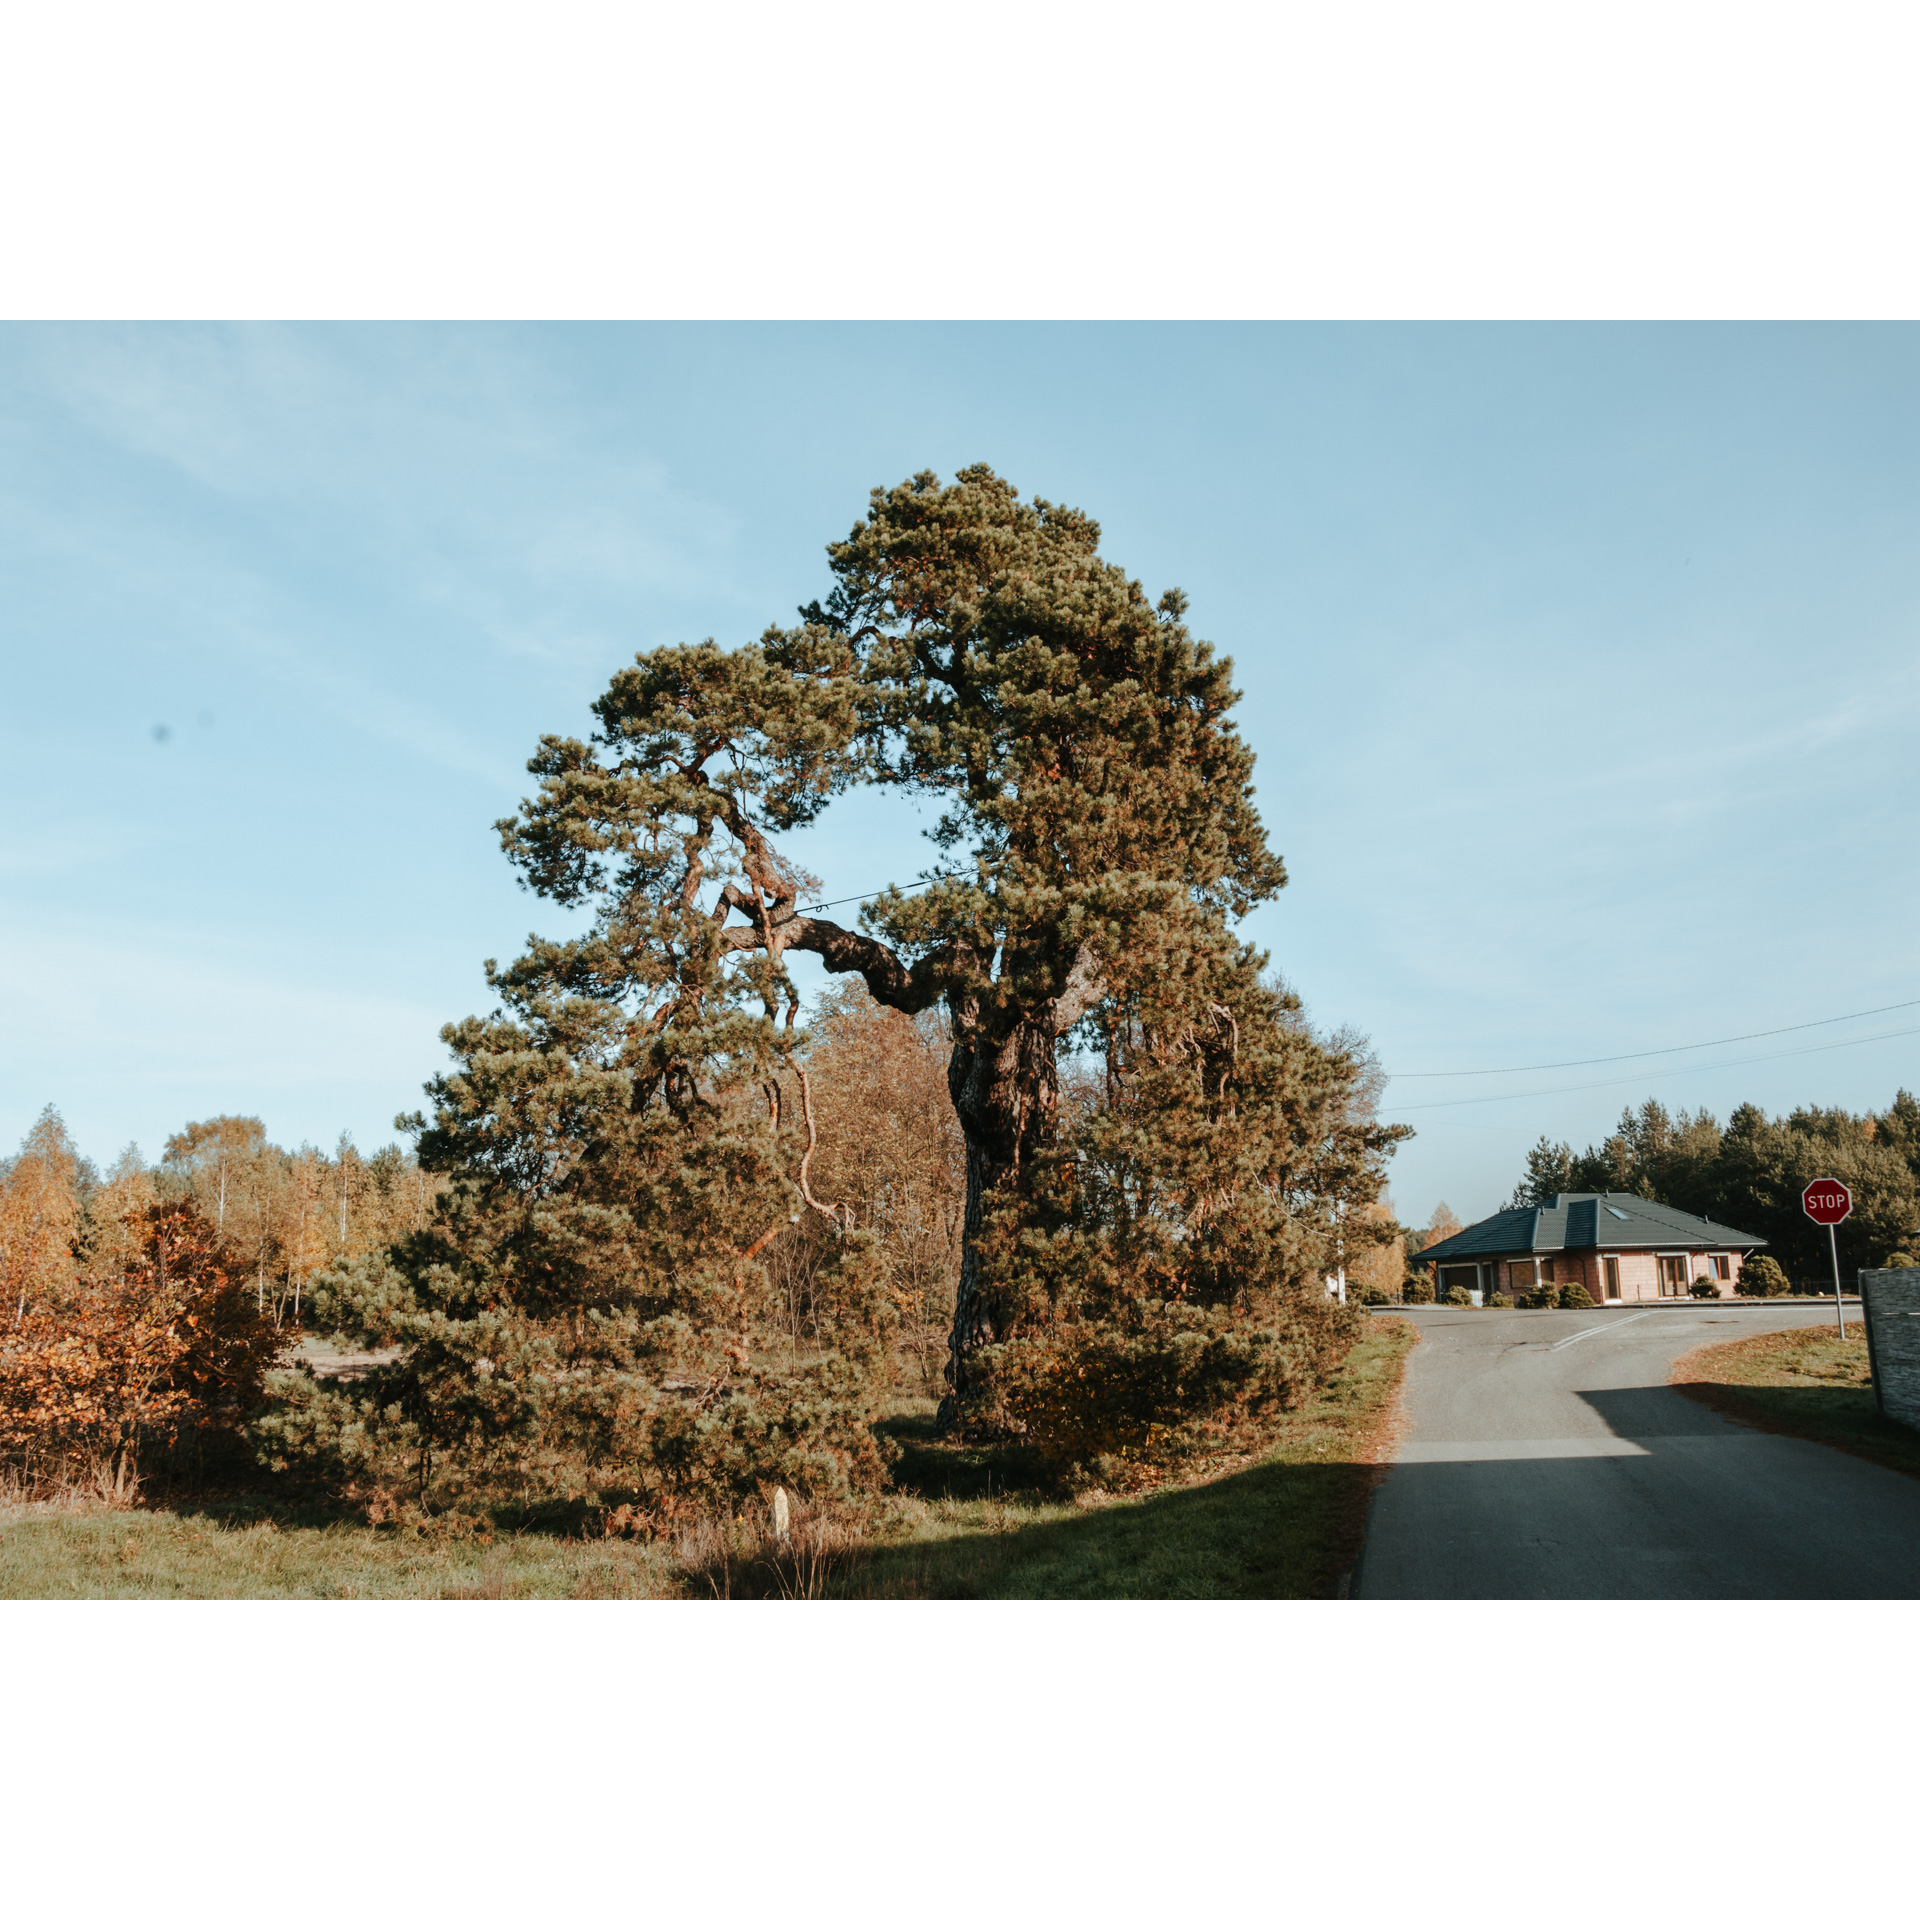 In the center a huge pine tree with spreading branches and a thick trunk, in the back an asphalt road and a single-family house, in the background trees and a blue, almost cloudless sky